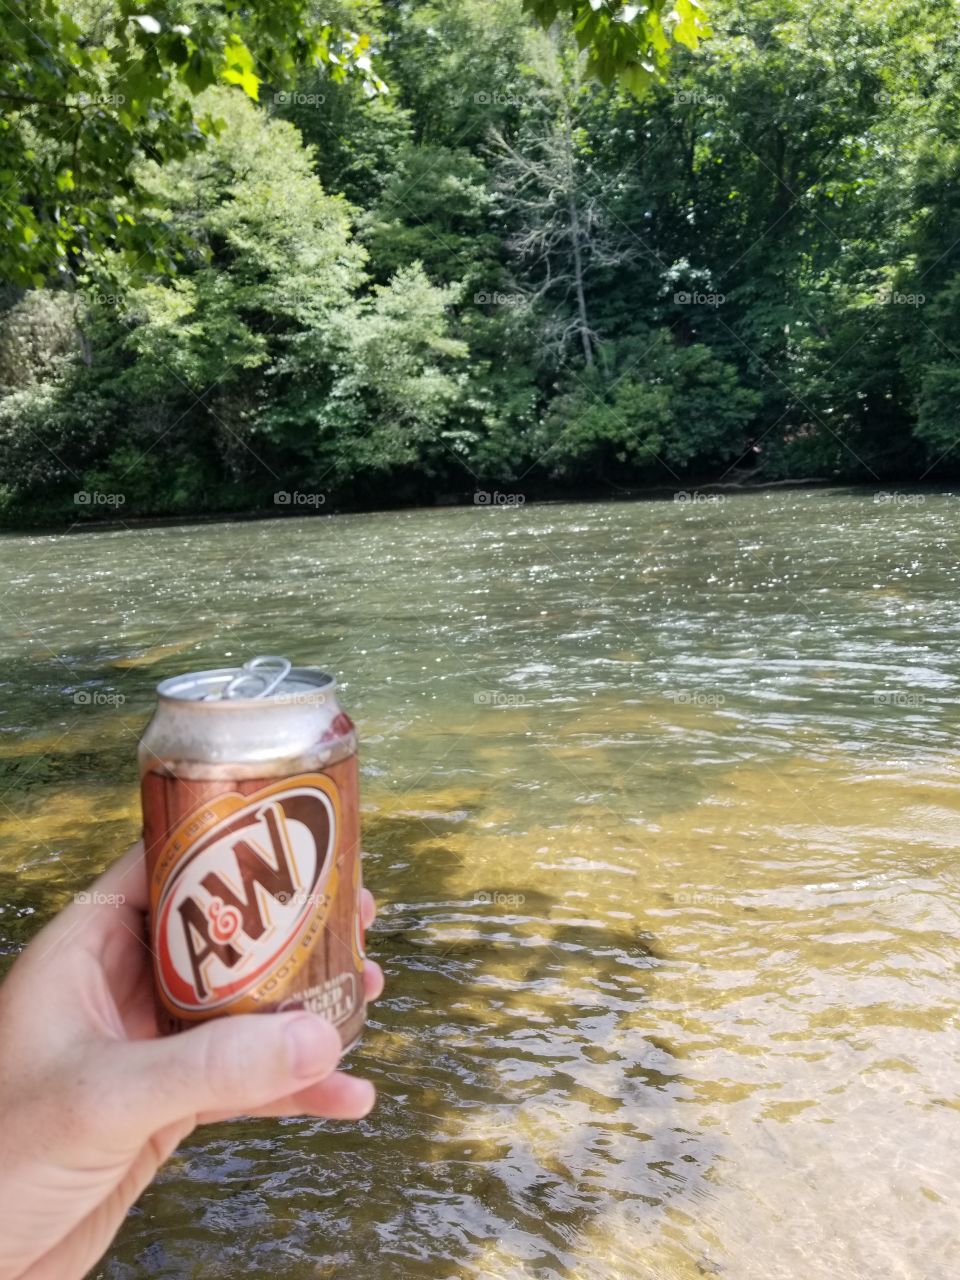 root beer by the river